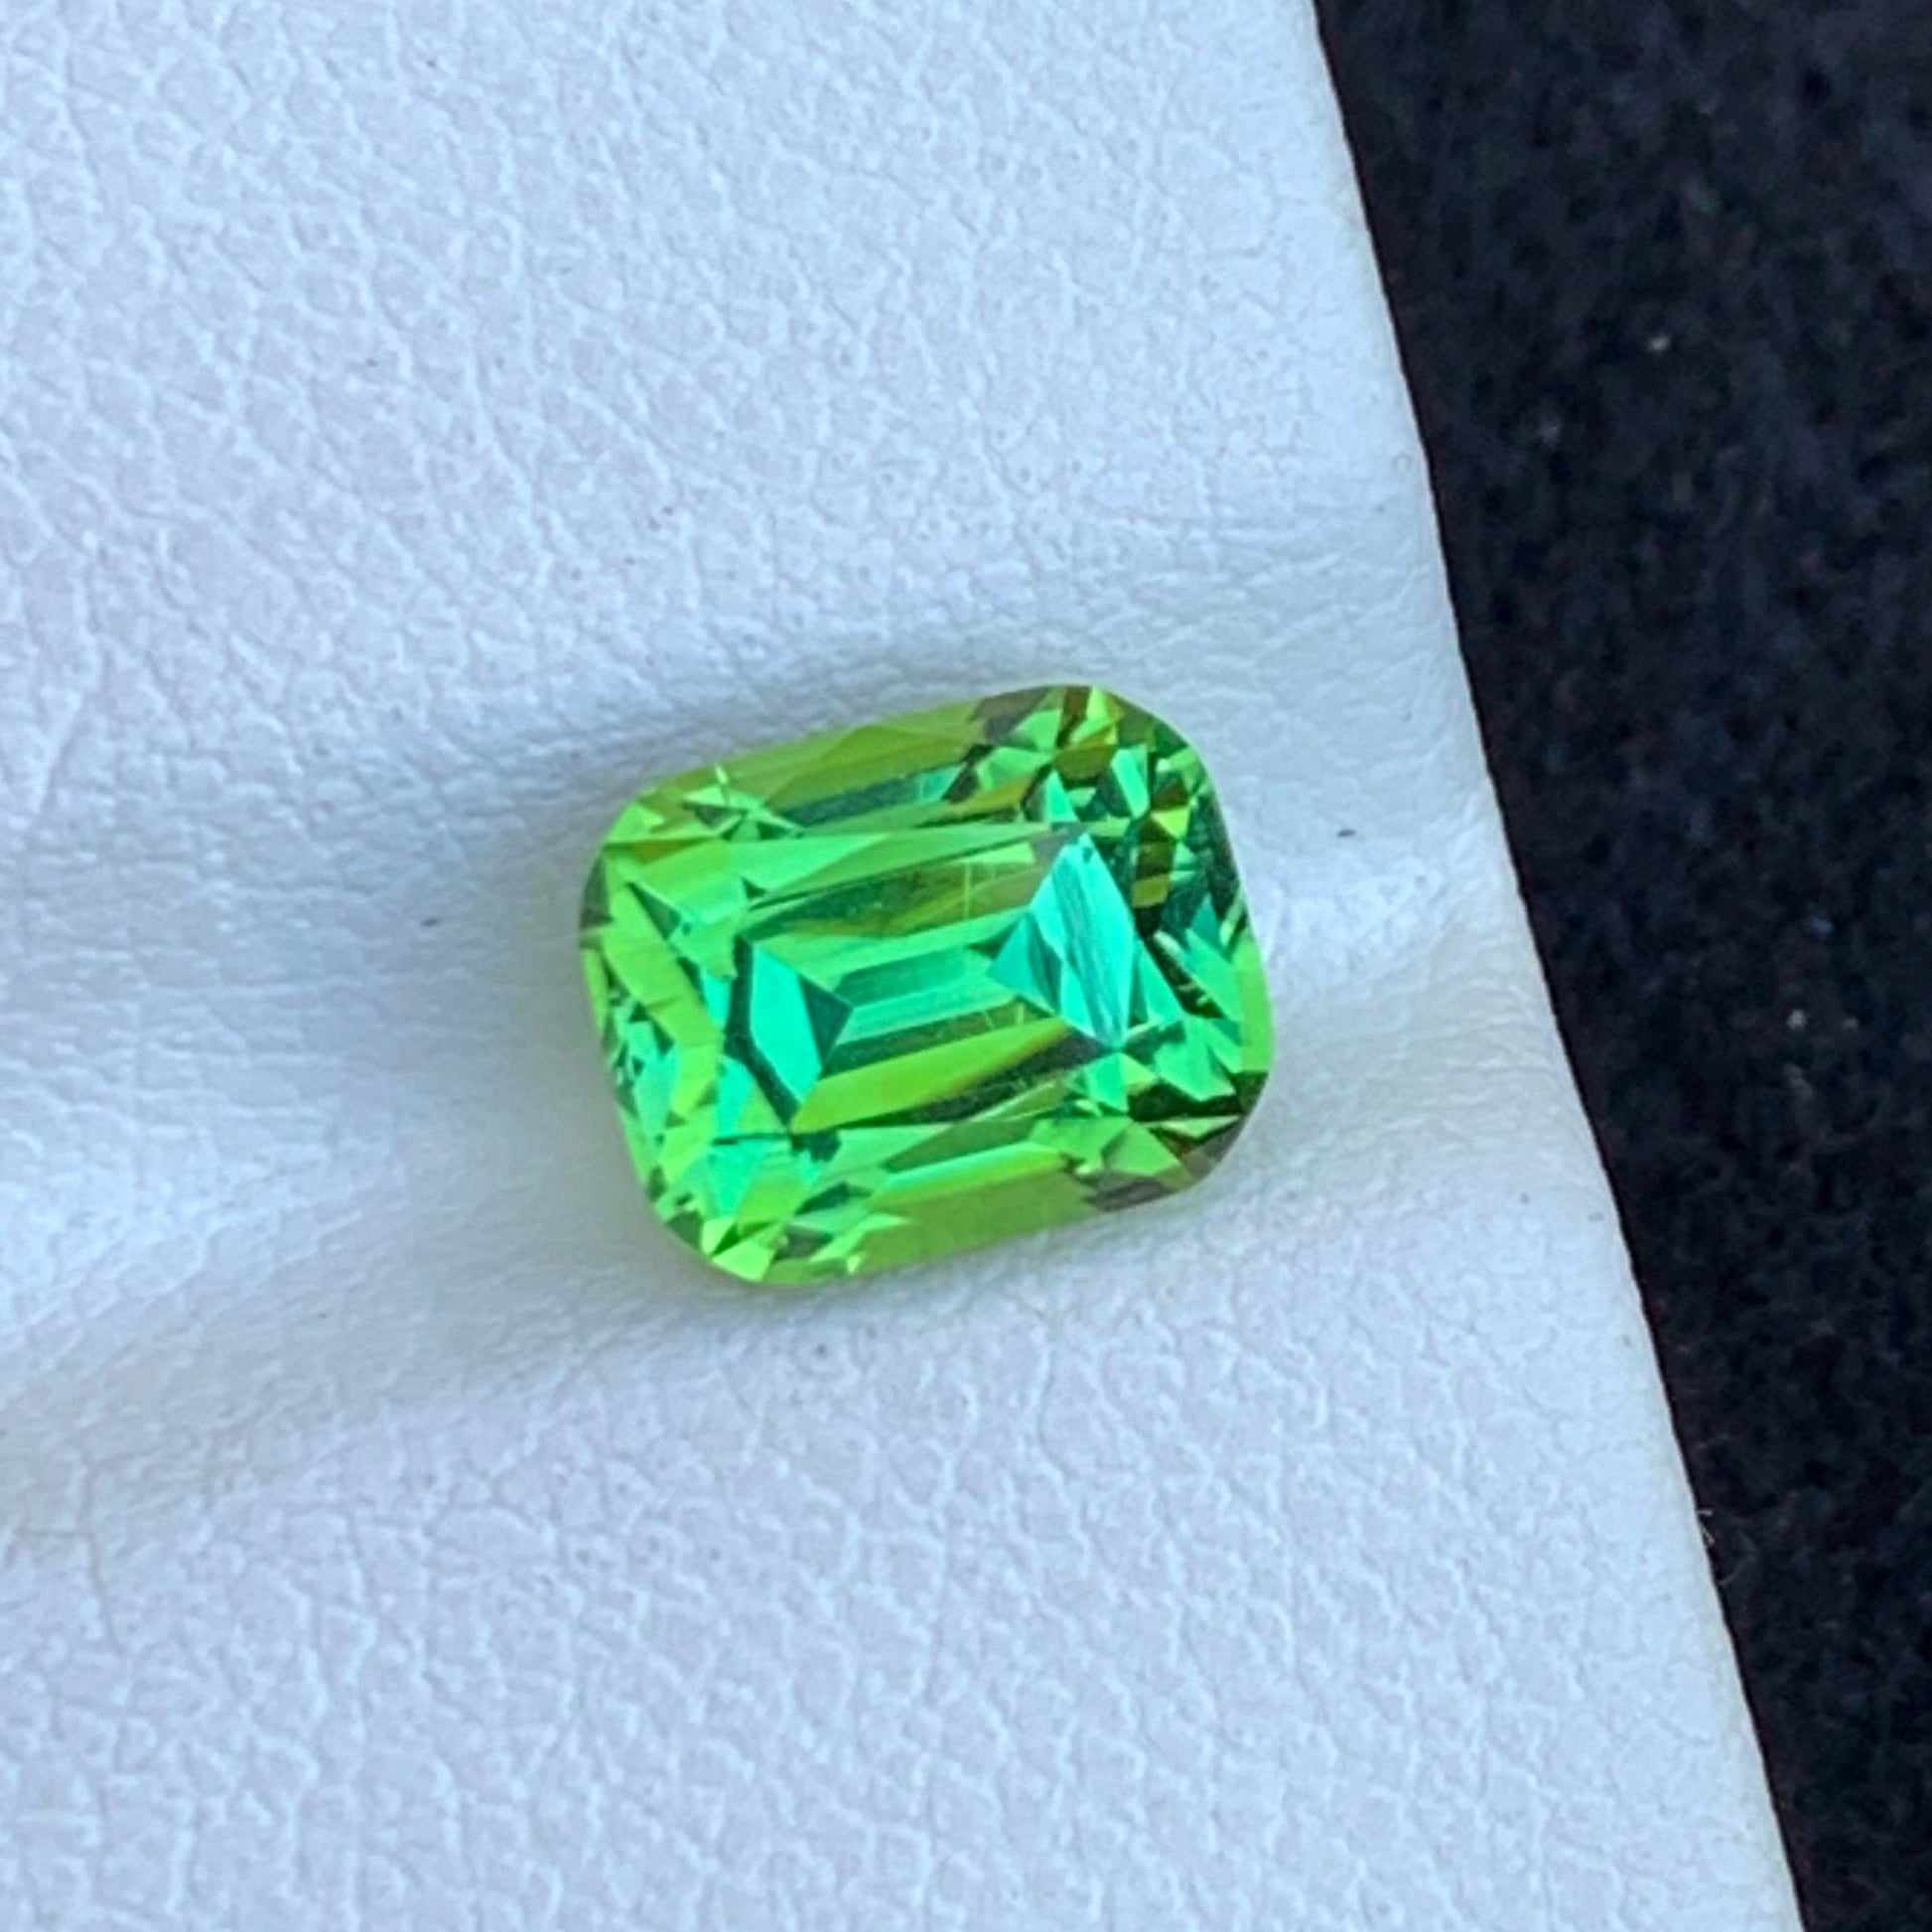 Loose Forest green tourmaline